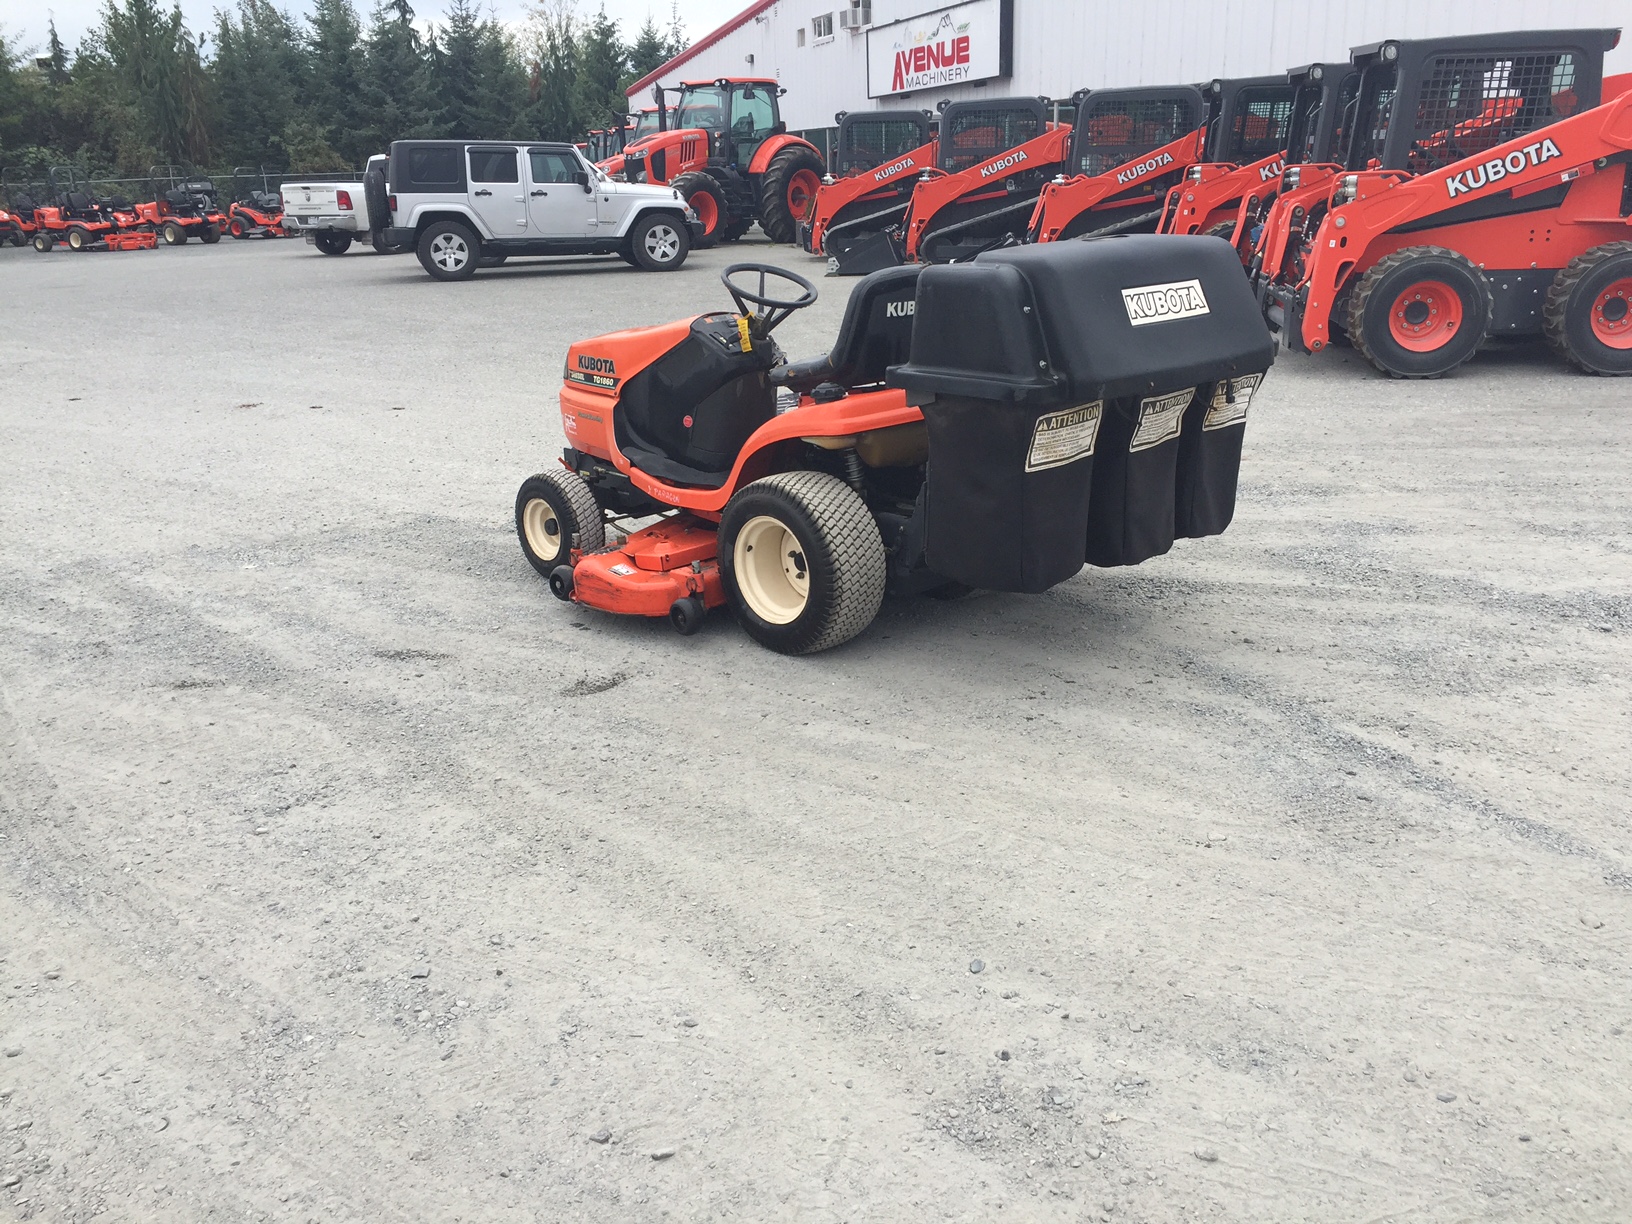 2001 Kubota Tg1860 Garden Tractor For Sale In Abbotsford Bc Powered